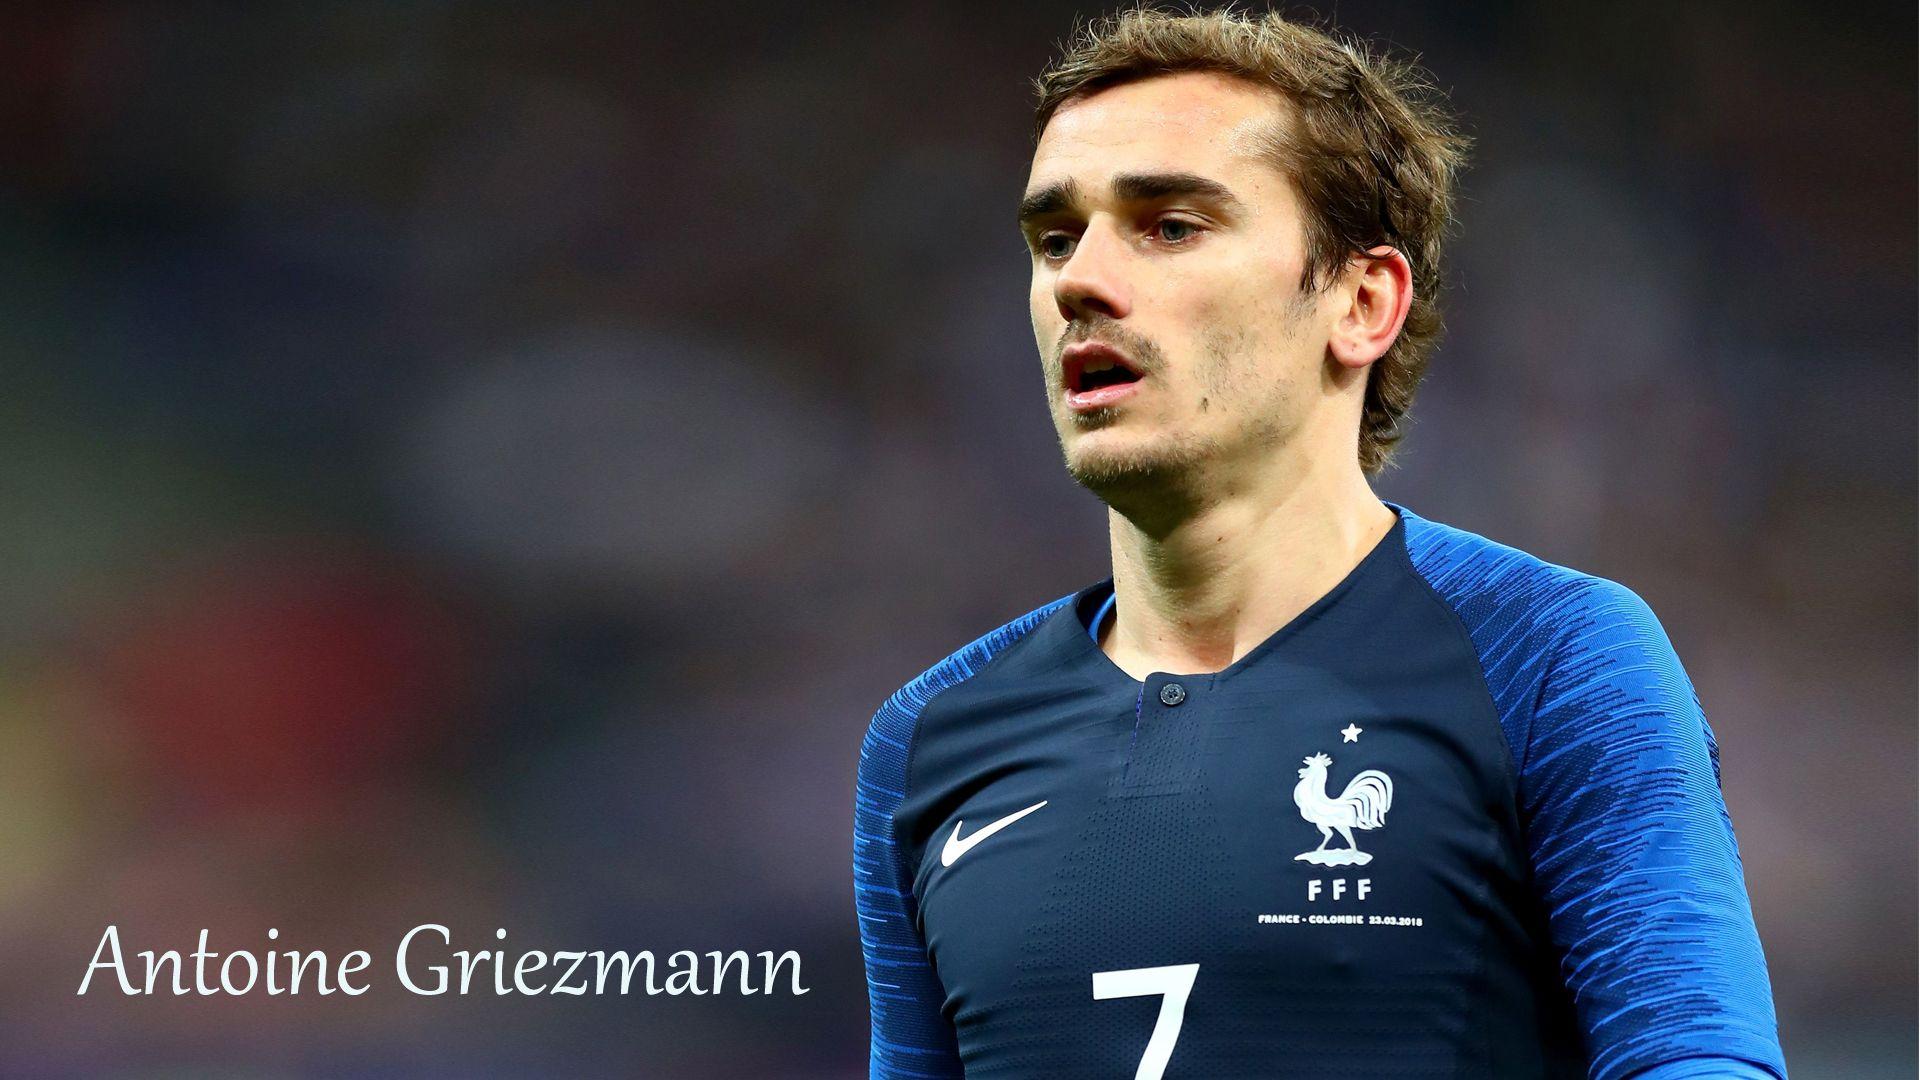 Antoine Griezmann with 2018 France Football Team Jersey for World